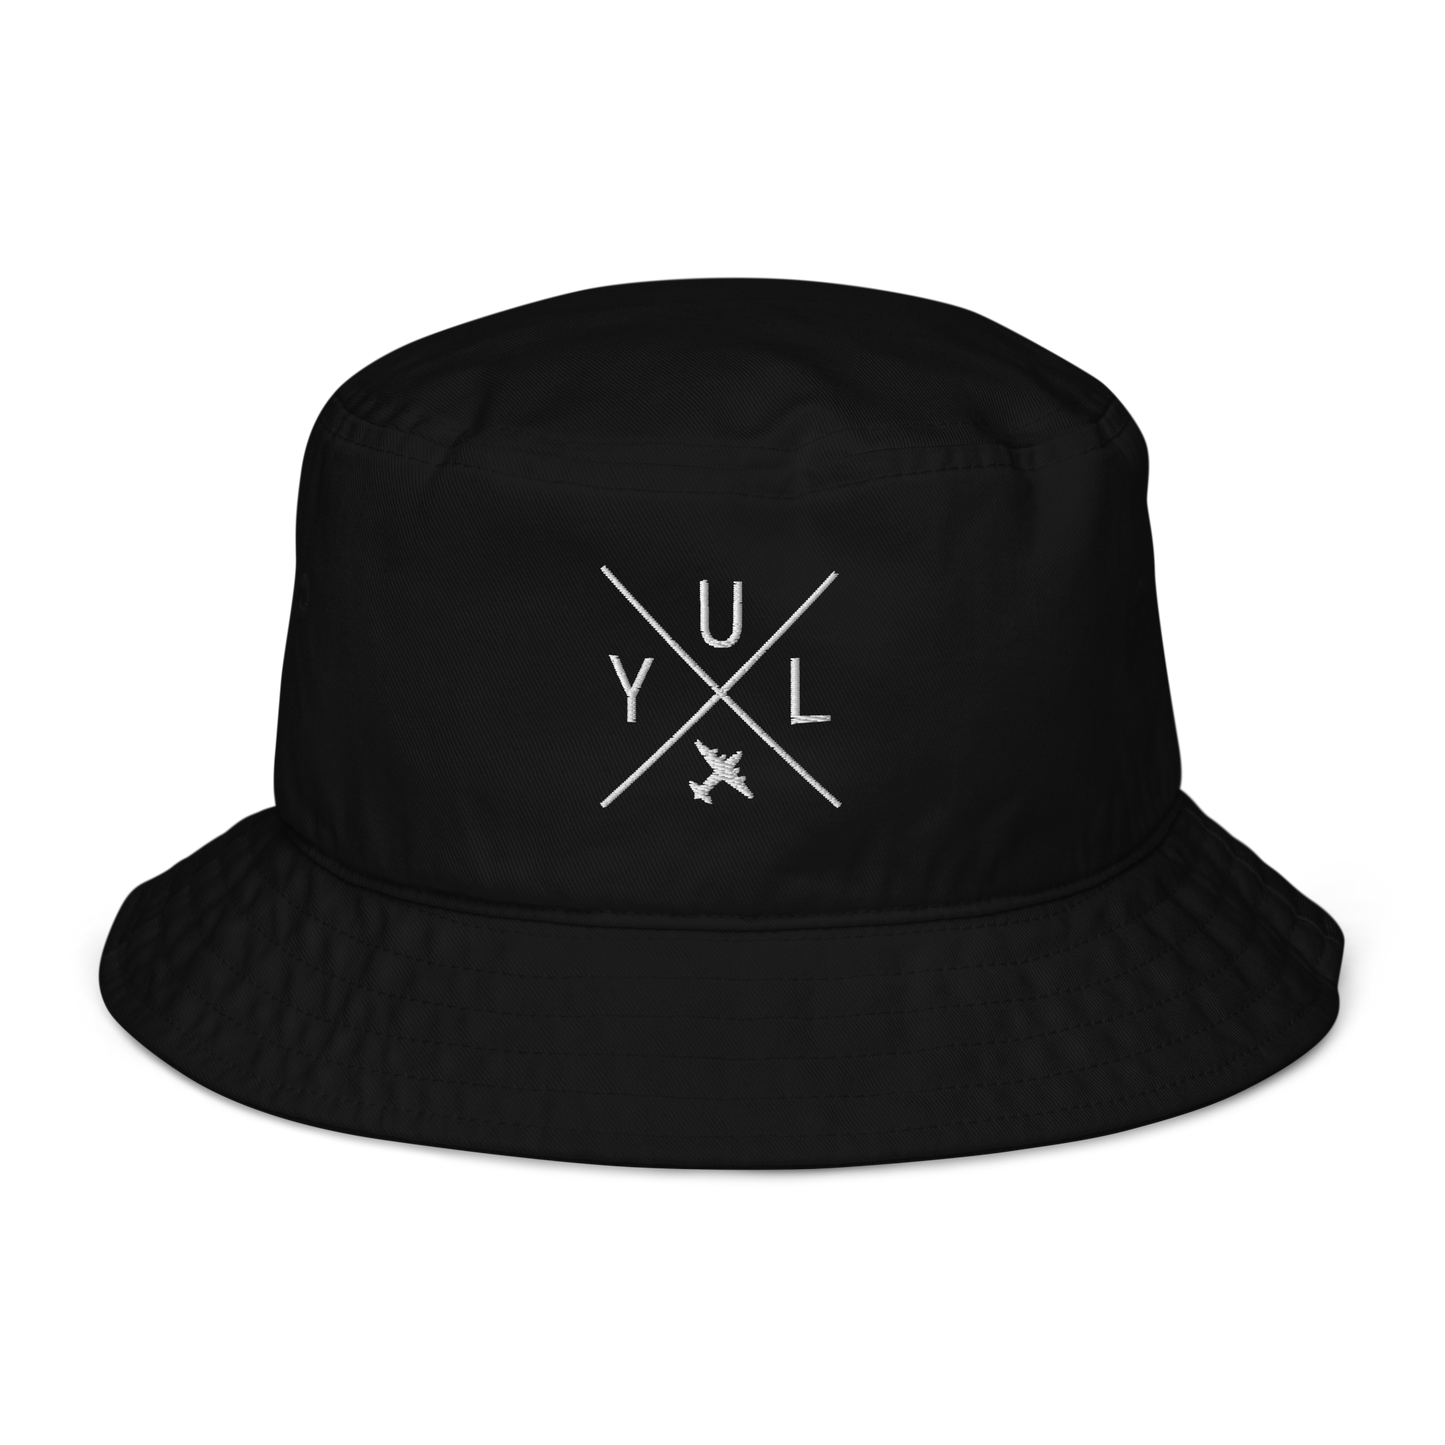 YHM Designs - YUL Montreal Organic Cotton Bucket Hat - Crossed-X Design with Airport Code and Vintage Propliner - White Embroidery - Image 01